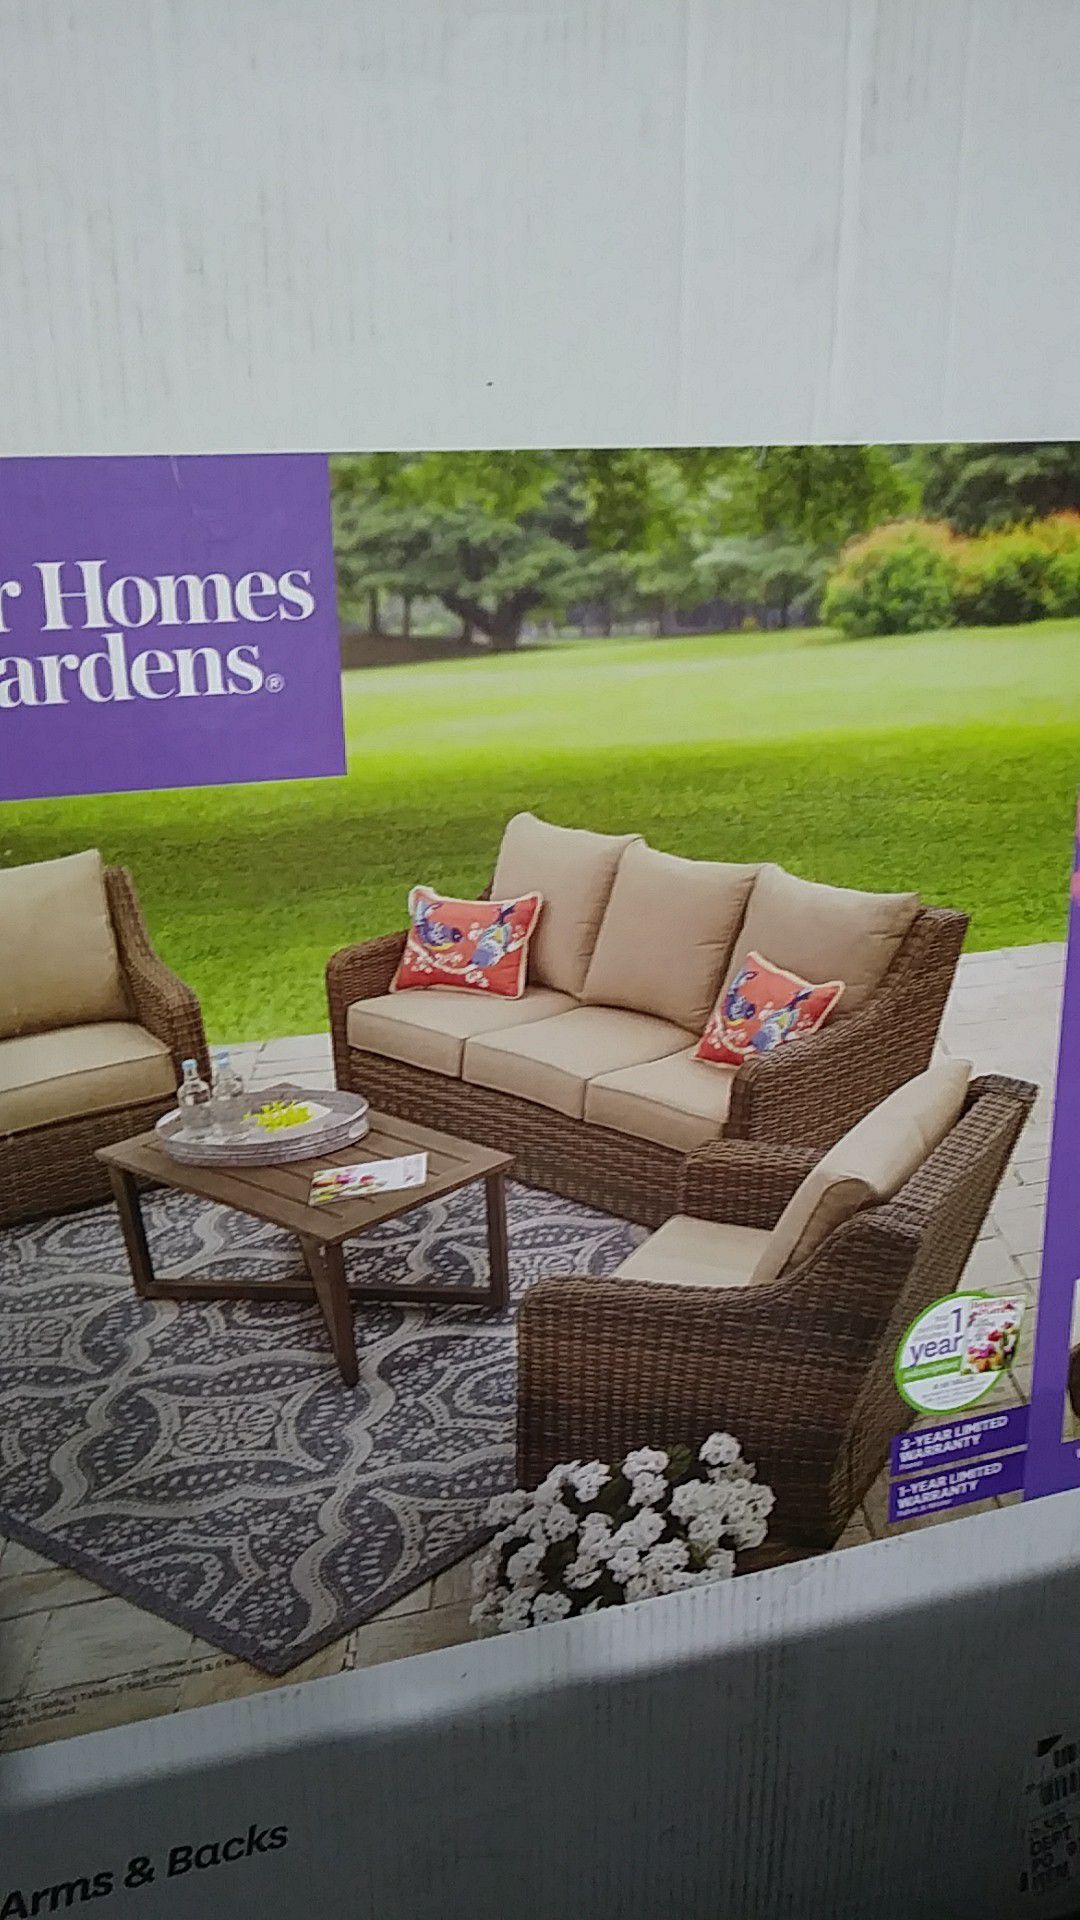 Better Homes and Gardens 4 pc Patio Furniture Hawthorne Park